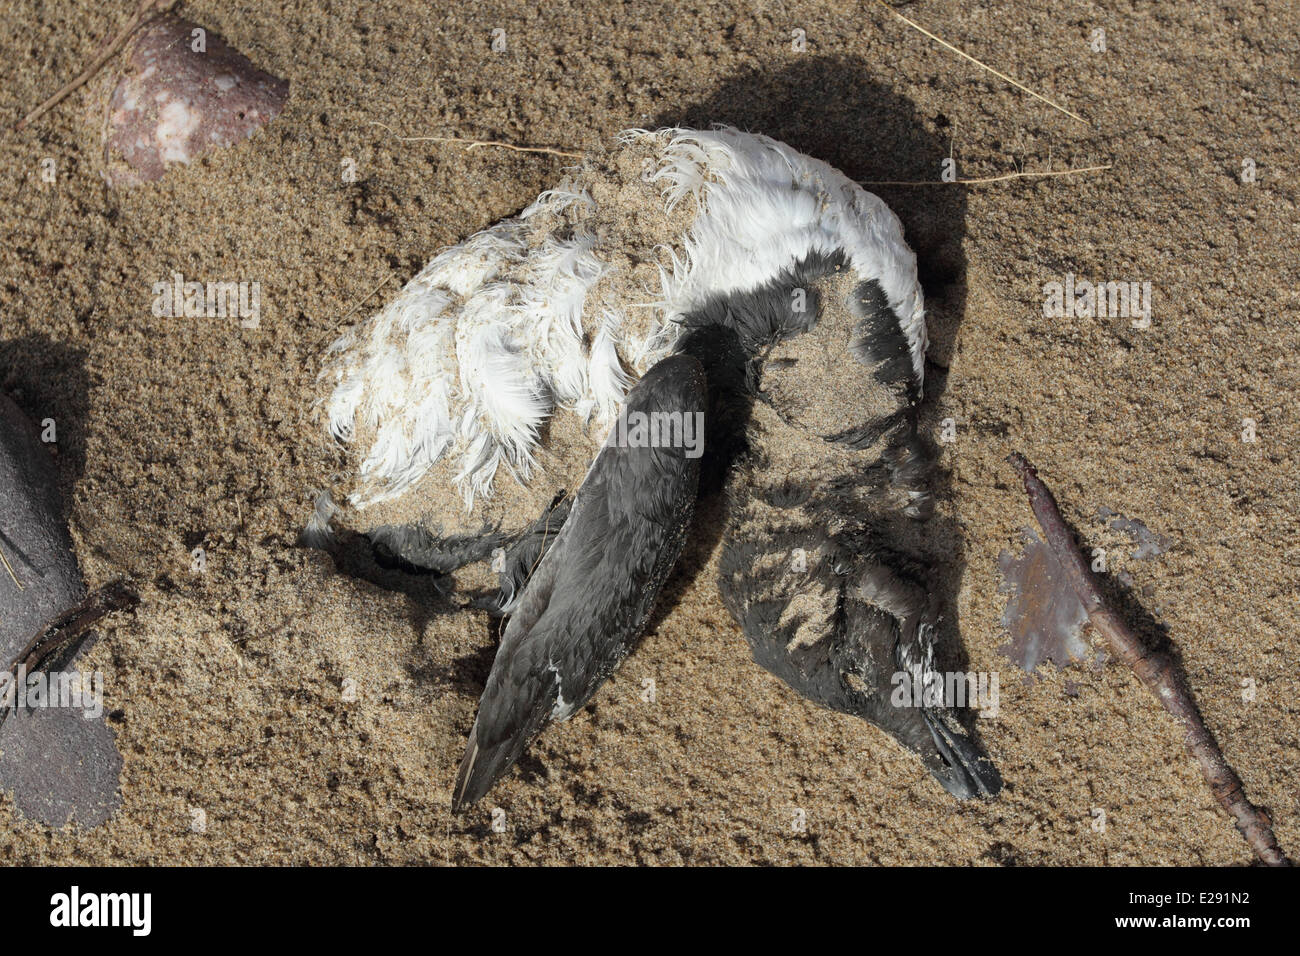 Common Guillemot (Uria aalge) dead adult, washed up on beach strandline, Gower Peninsula, West Glamorgan, South Wales, March Stock Photo